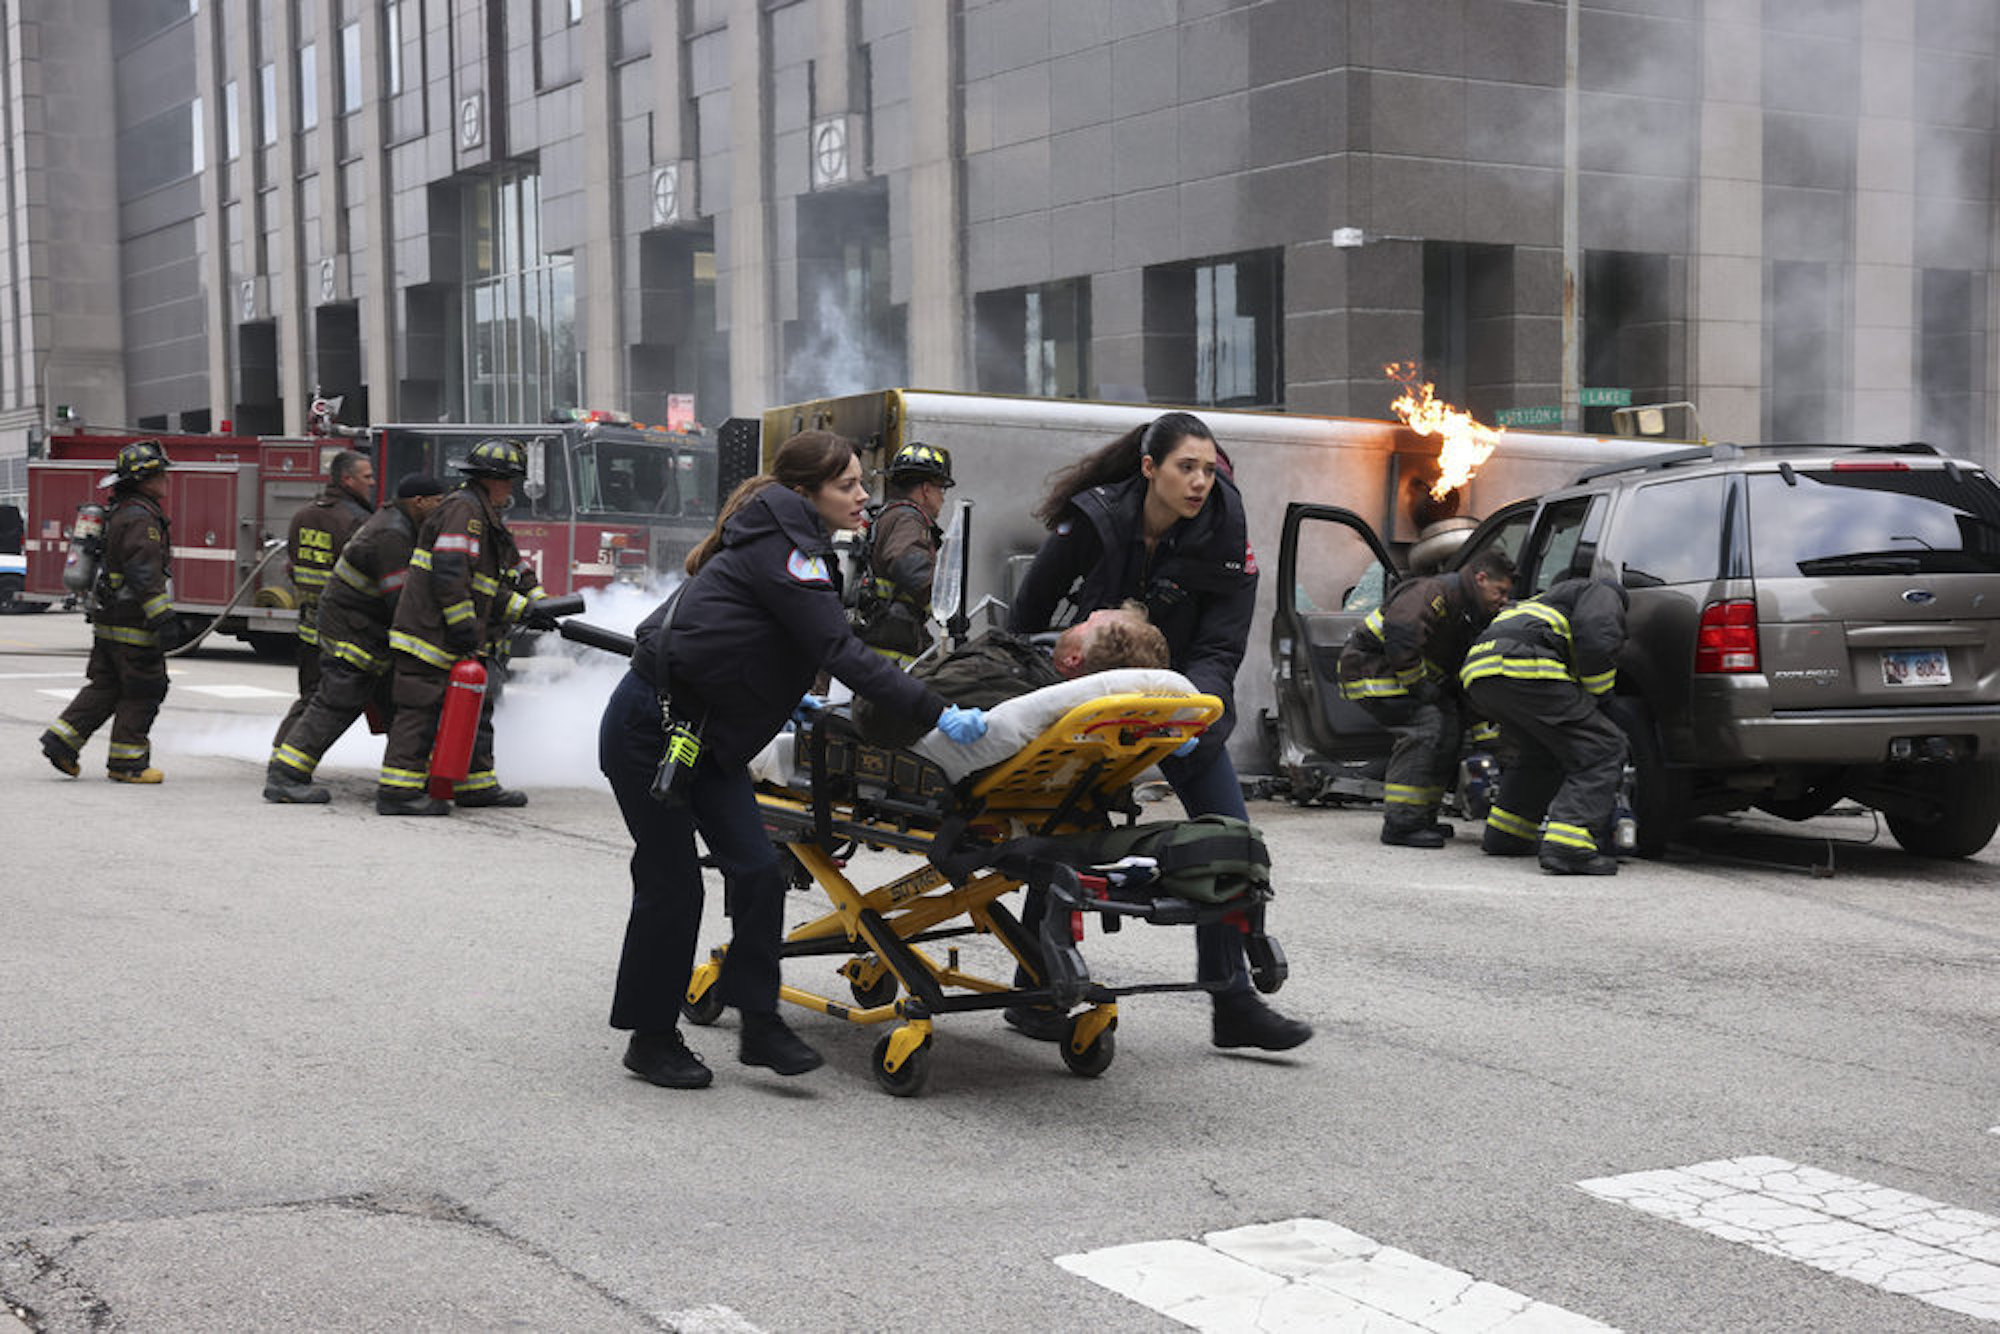 Emma Jacobs and Violet Mikami wheeling away someone in a stretcher on the street in 'Chicago Fire' Season 10 Episode 21